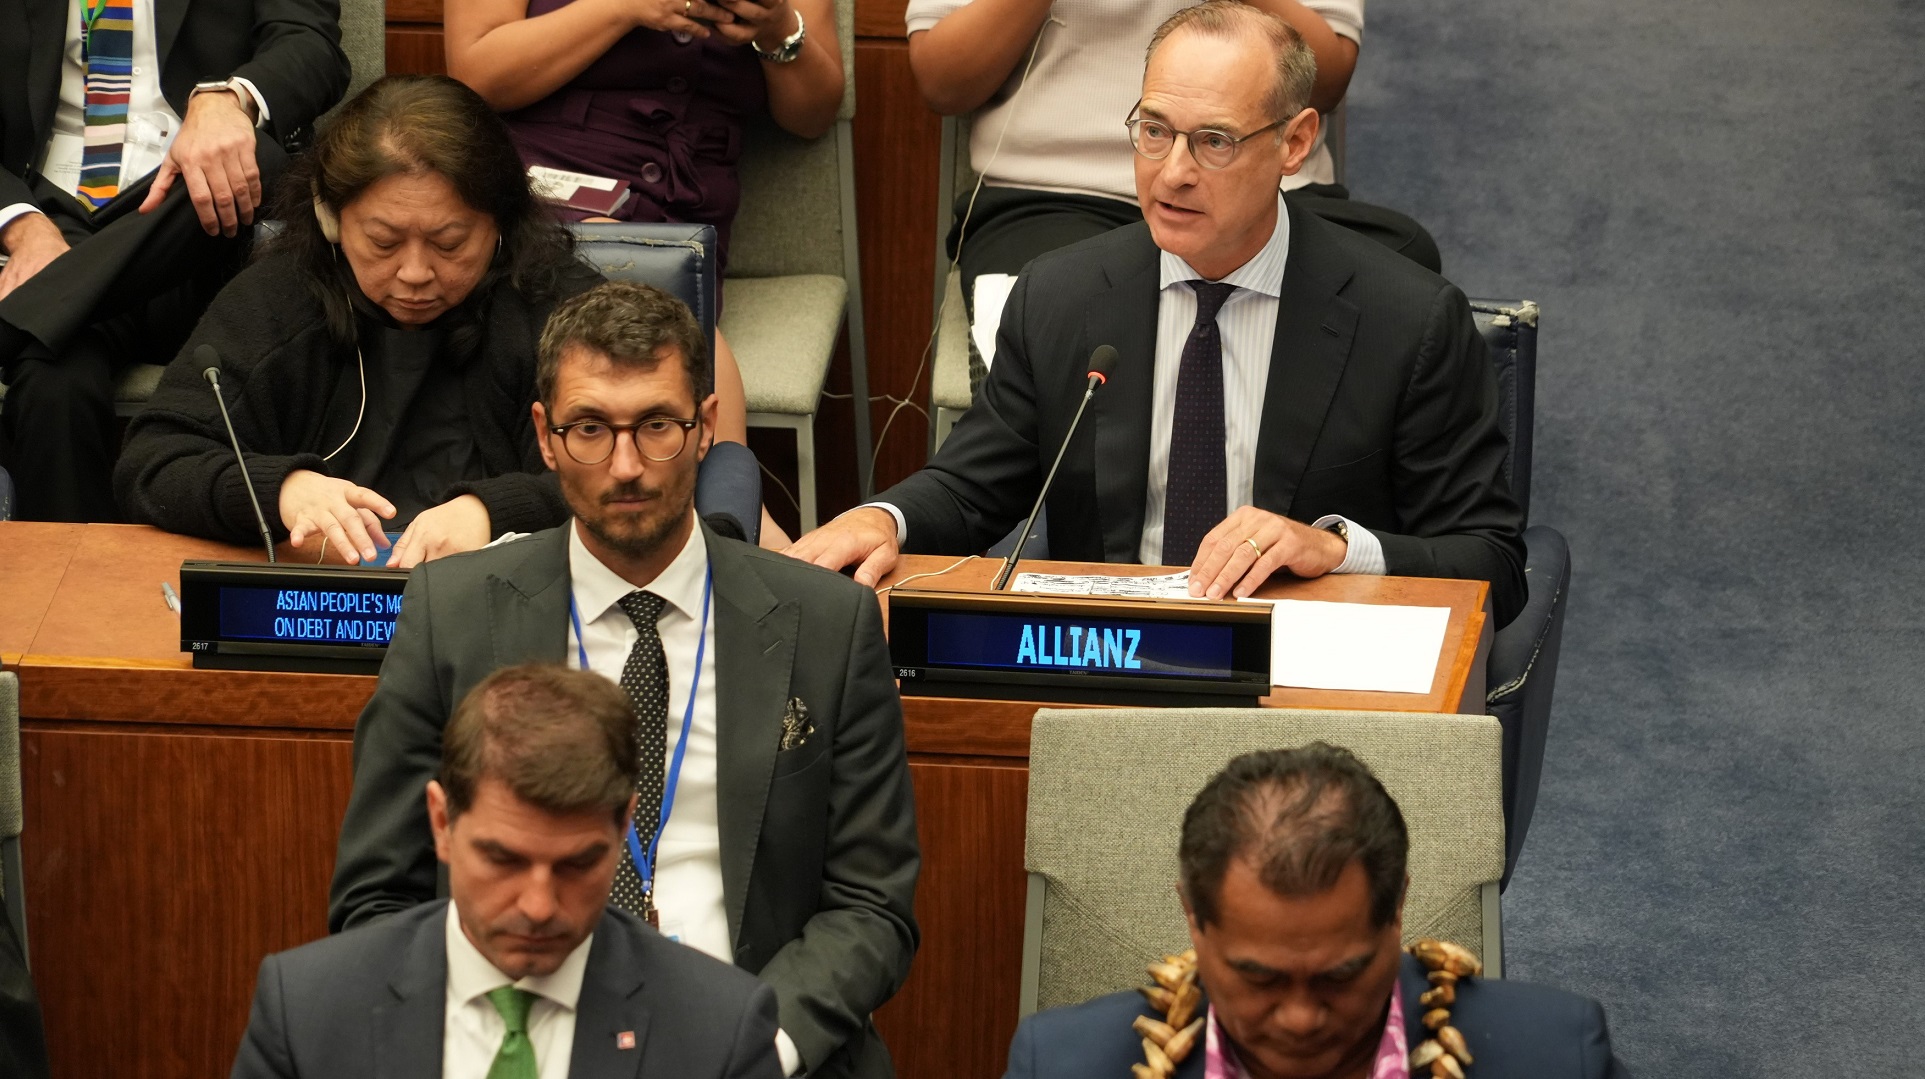 Oliver Bätke at the New York UN Climate Ambition Summit